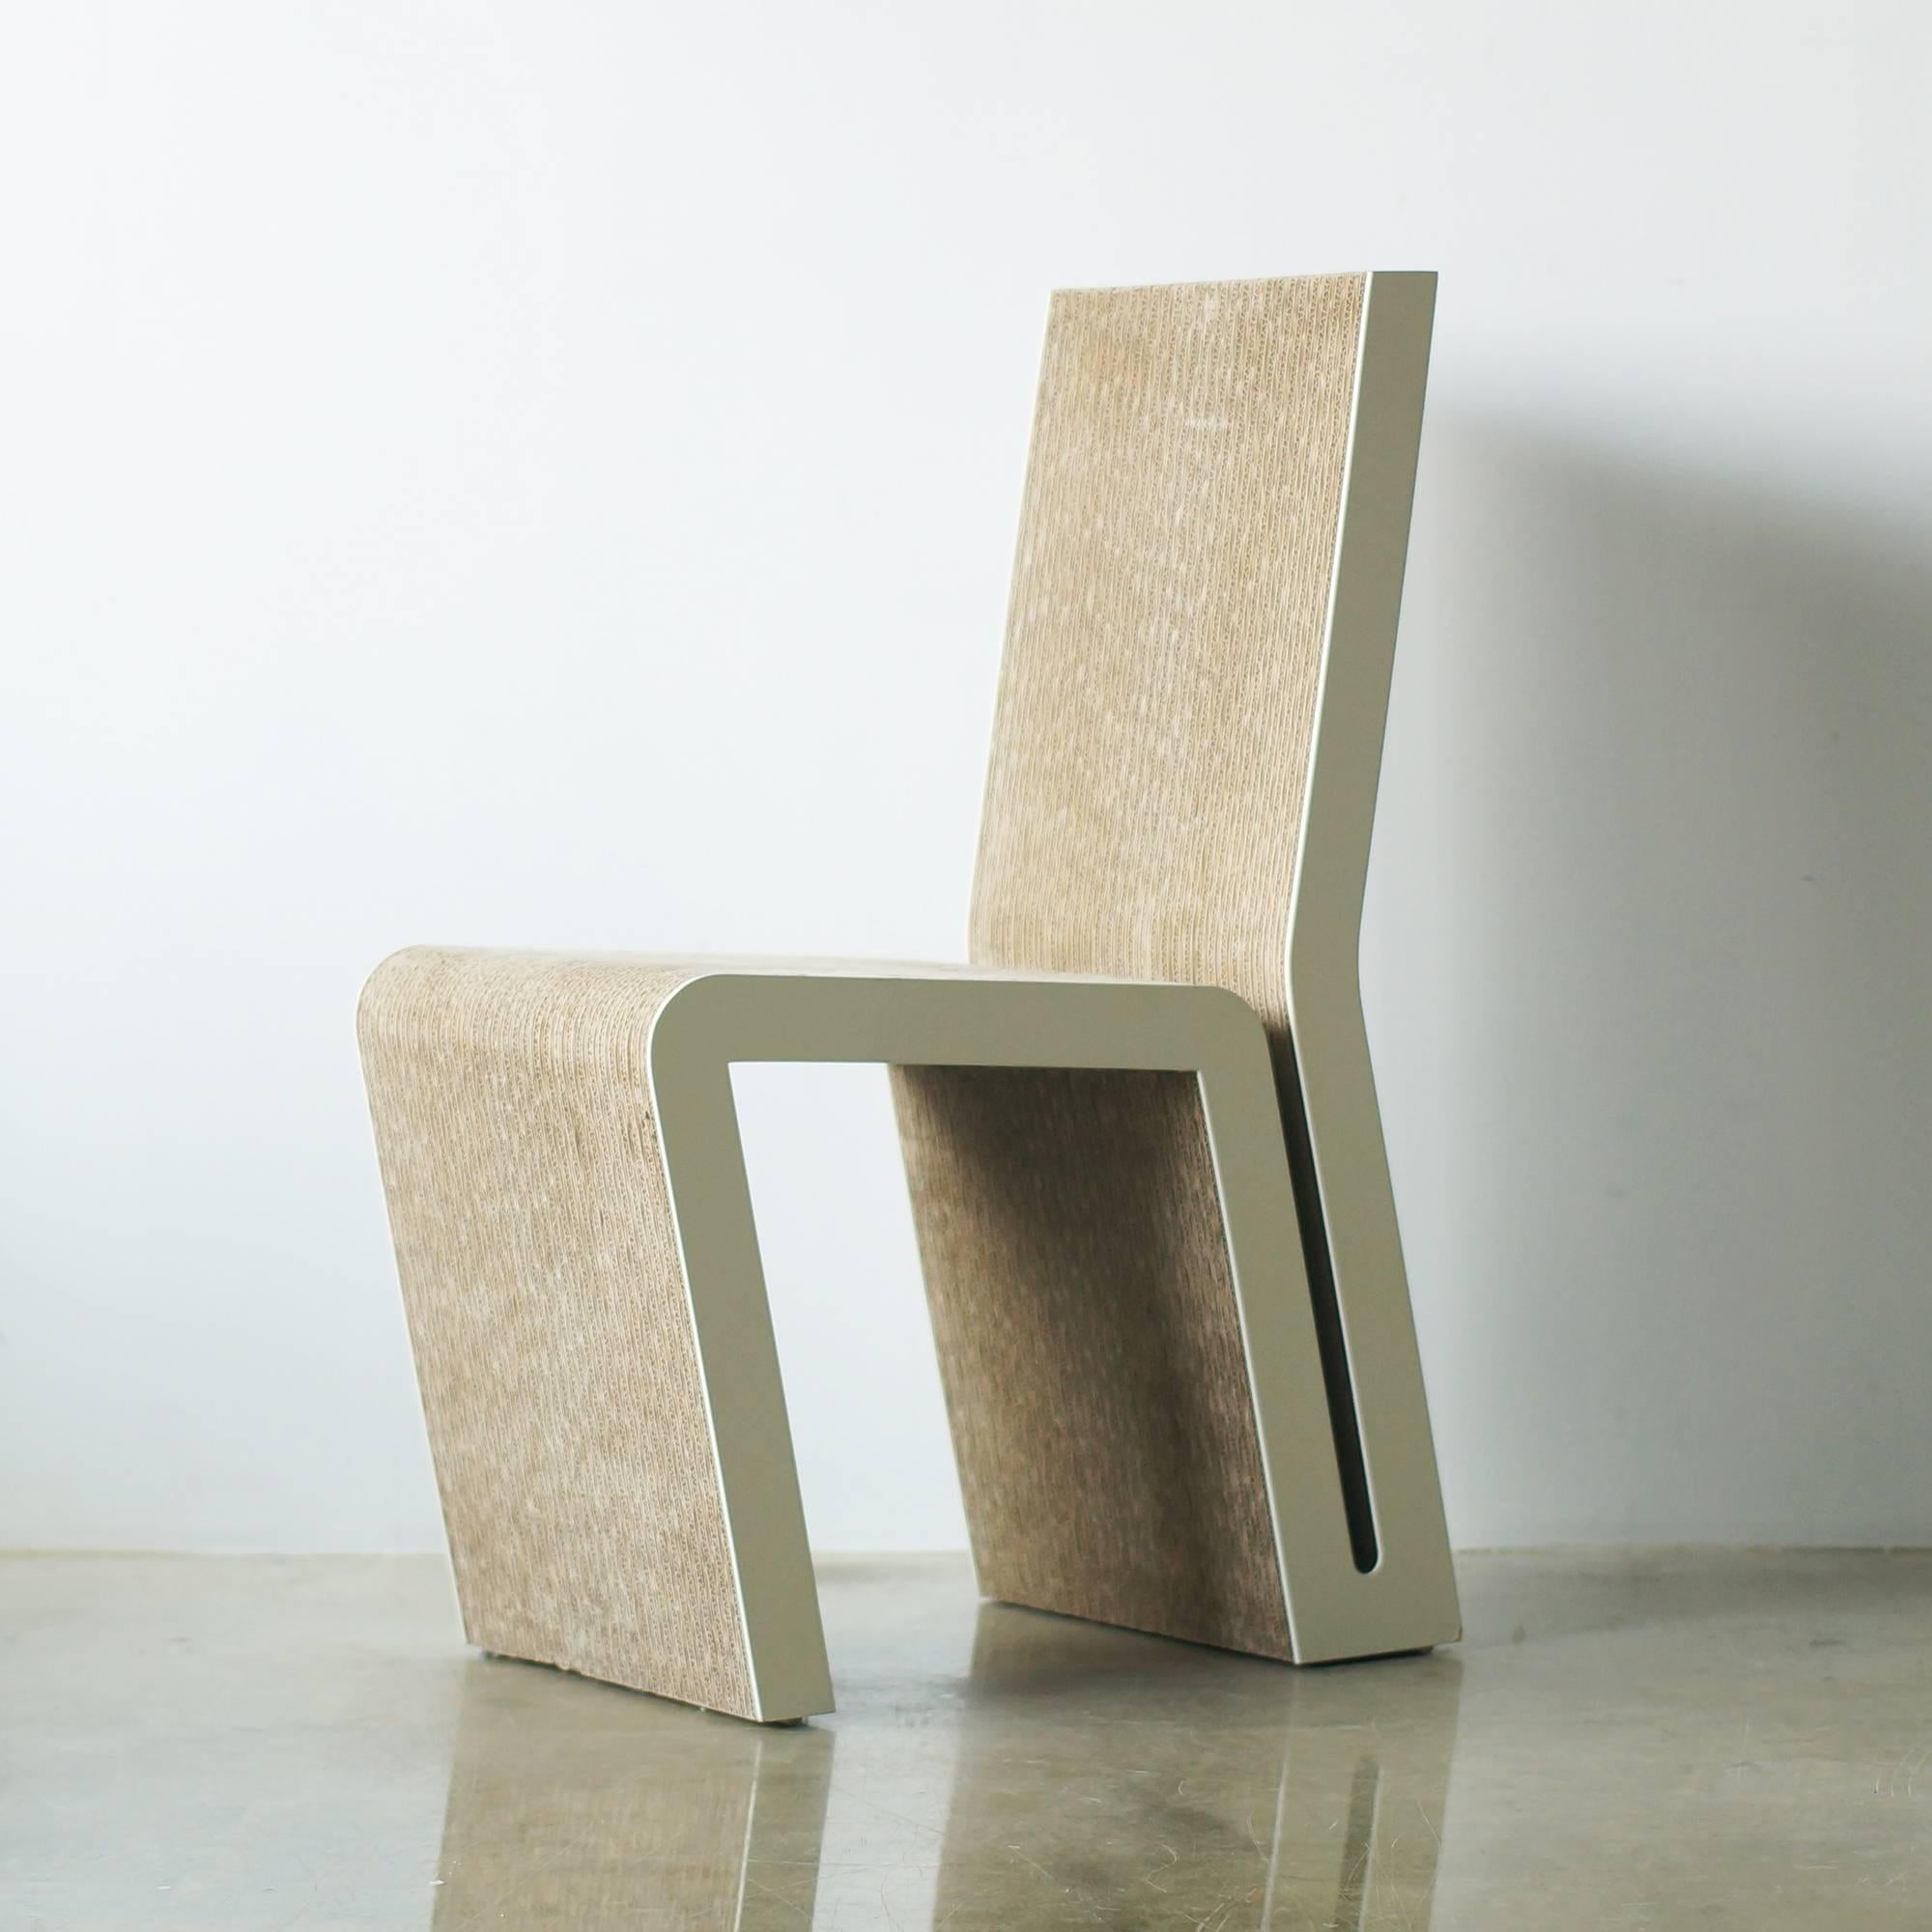 Frank Gehry's side chair for Vitra. 
This is the model that has guard on both sides of cardboard body.